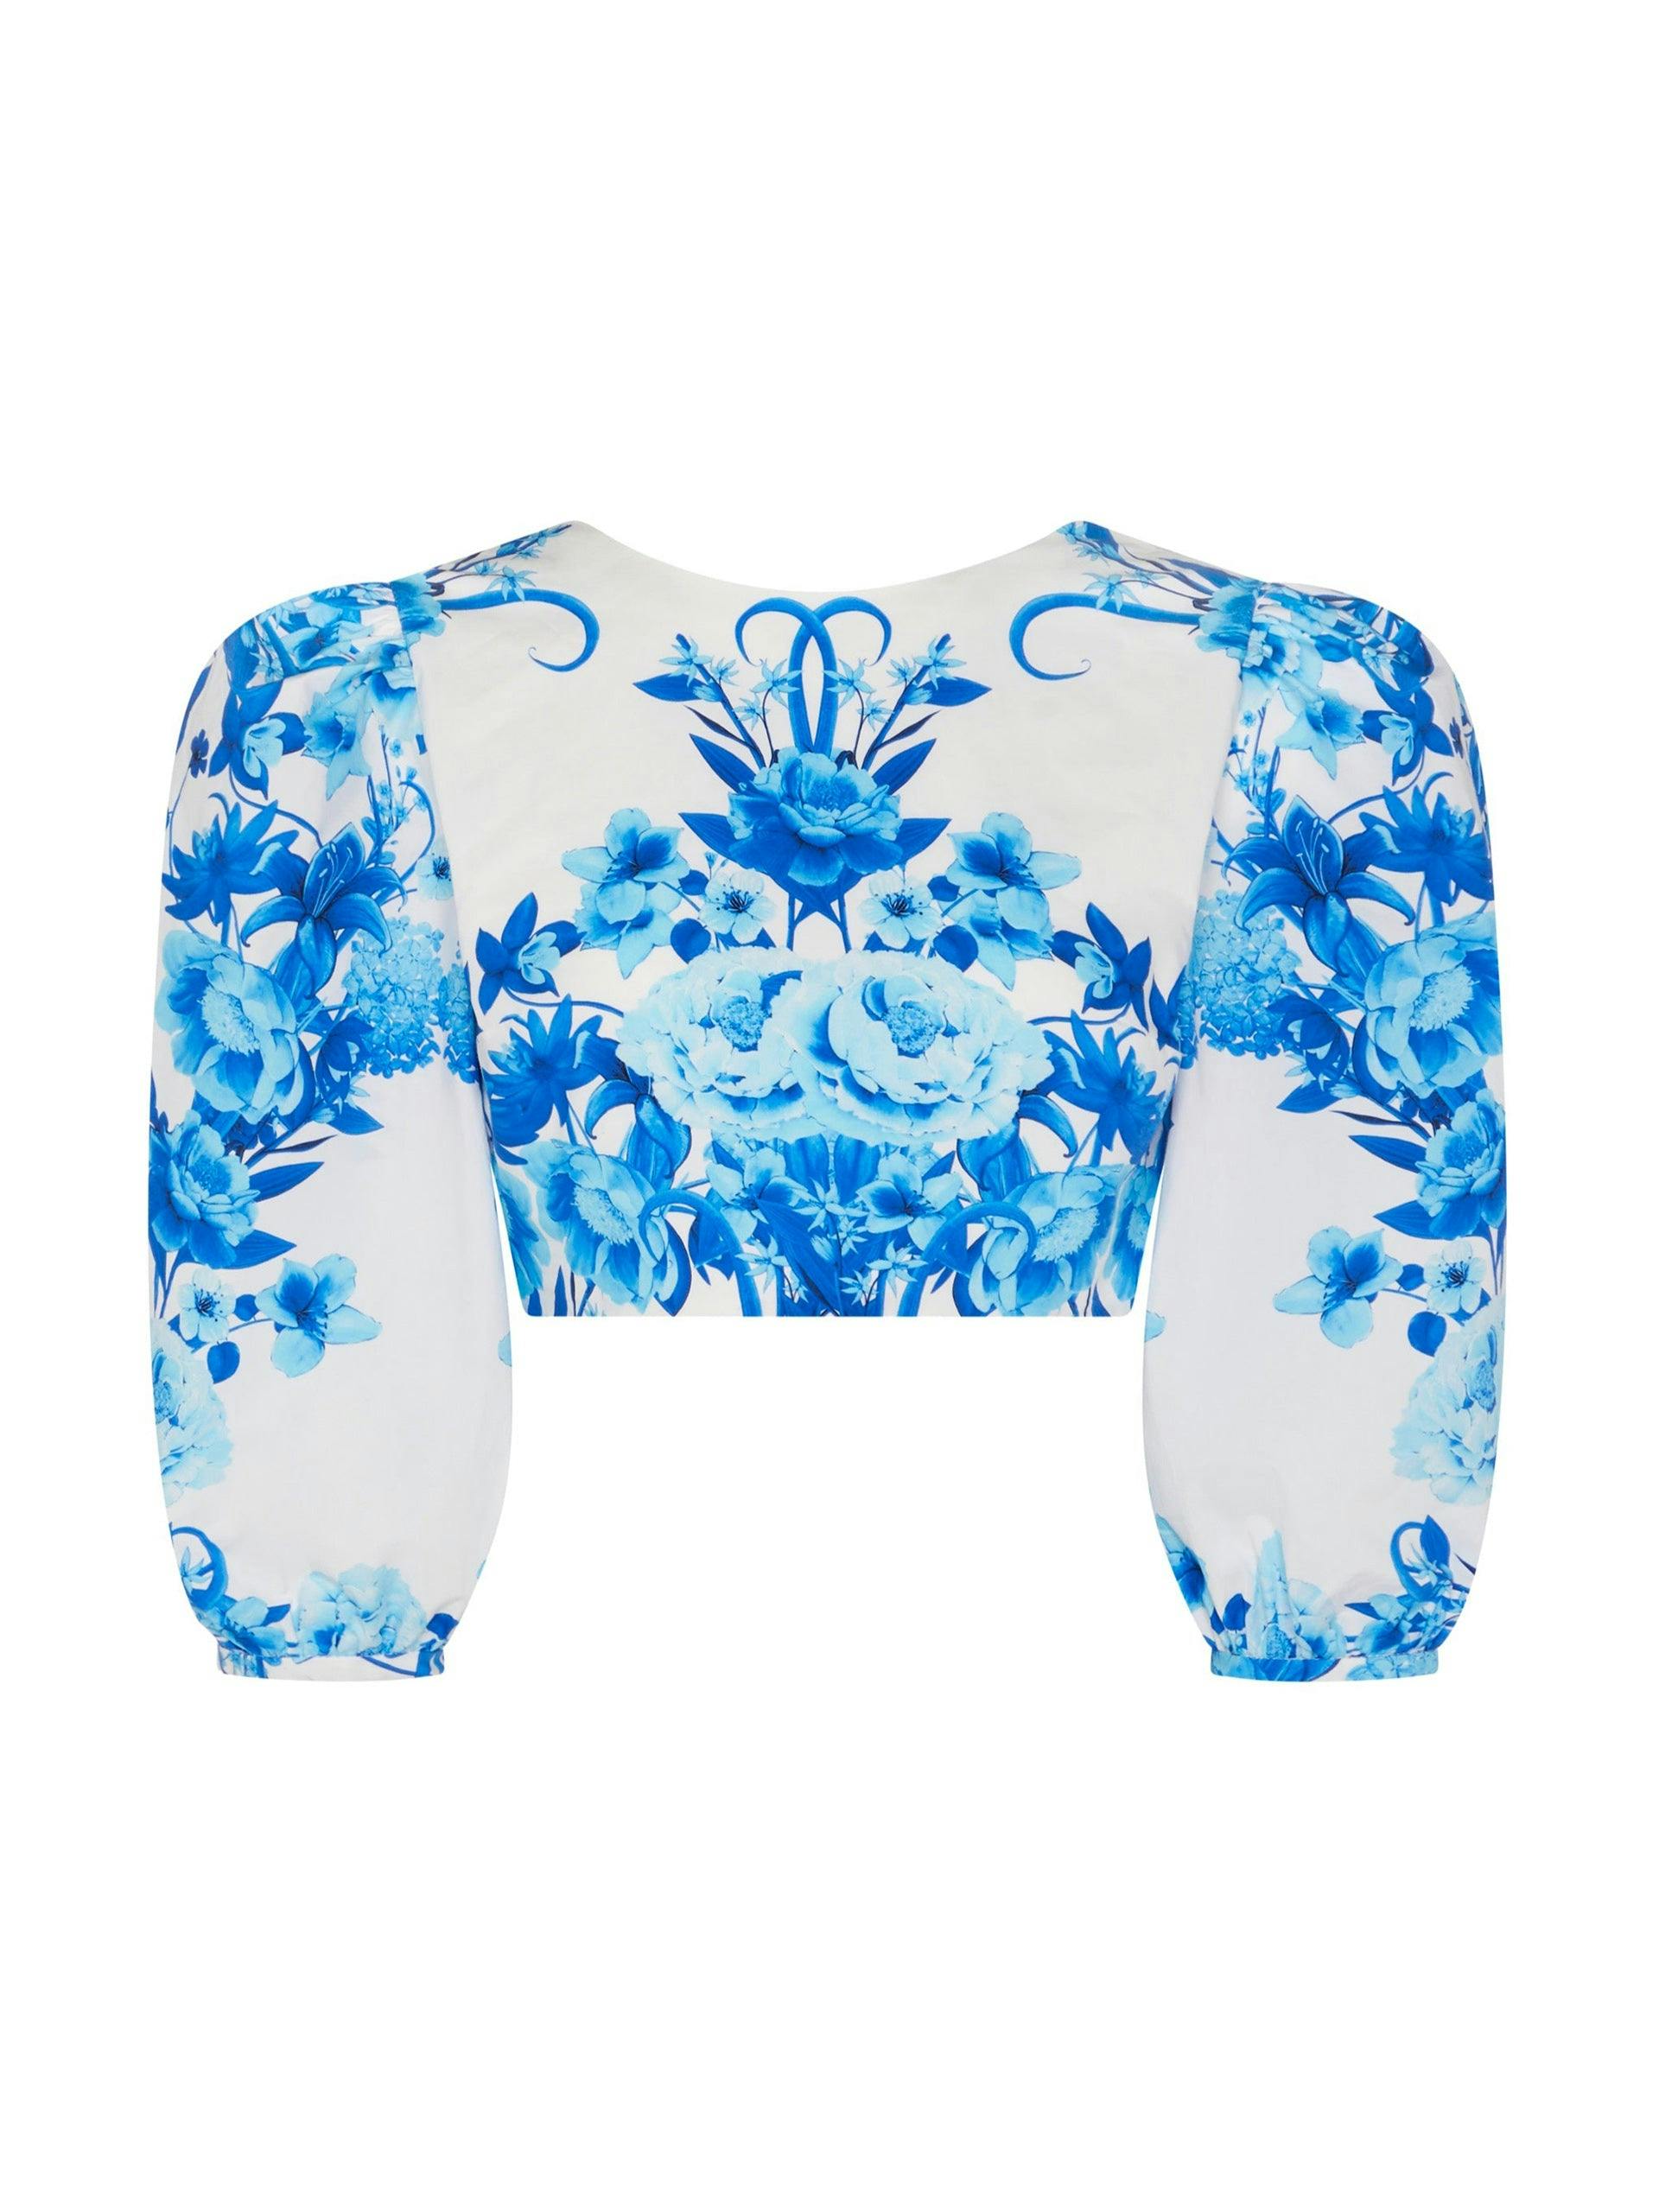 Rhea button back top in Antheia blue floral print